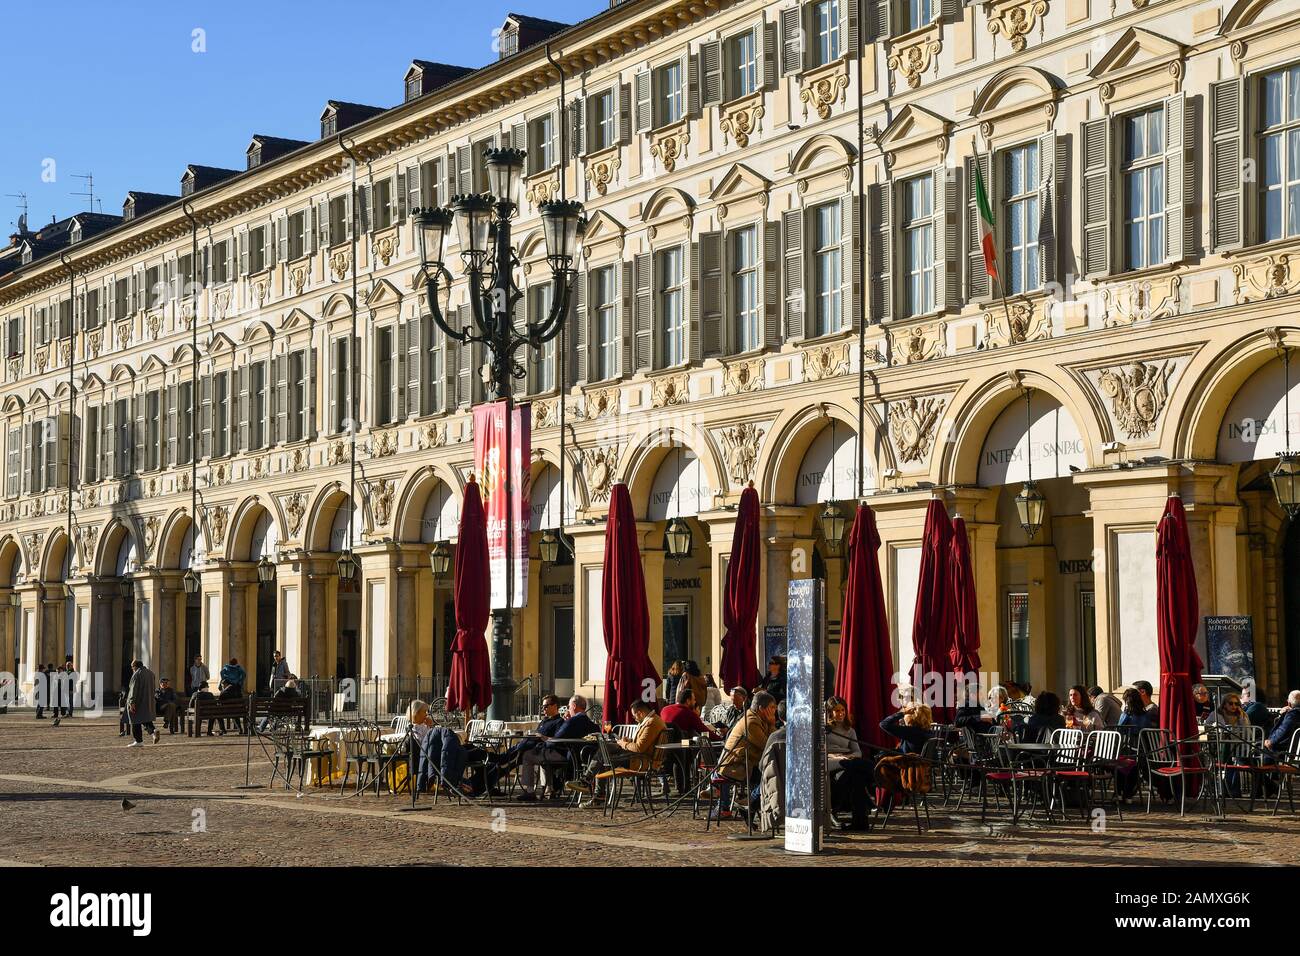 Glimpse of Piazza San Carlo square in the centre of Turin with people enjoying the sun in a sidewalk café on Christmas day, Piedmont, Italy Stock Photo